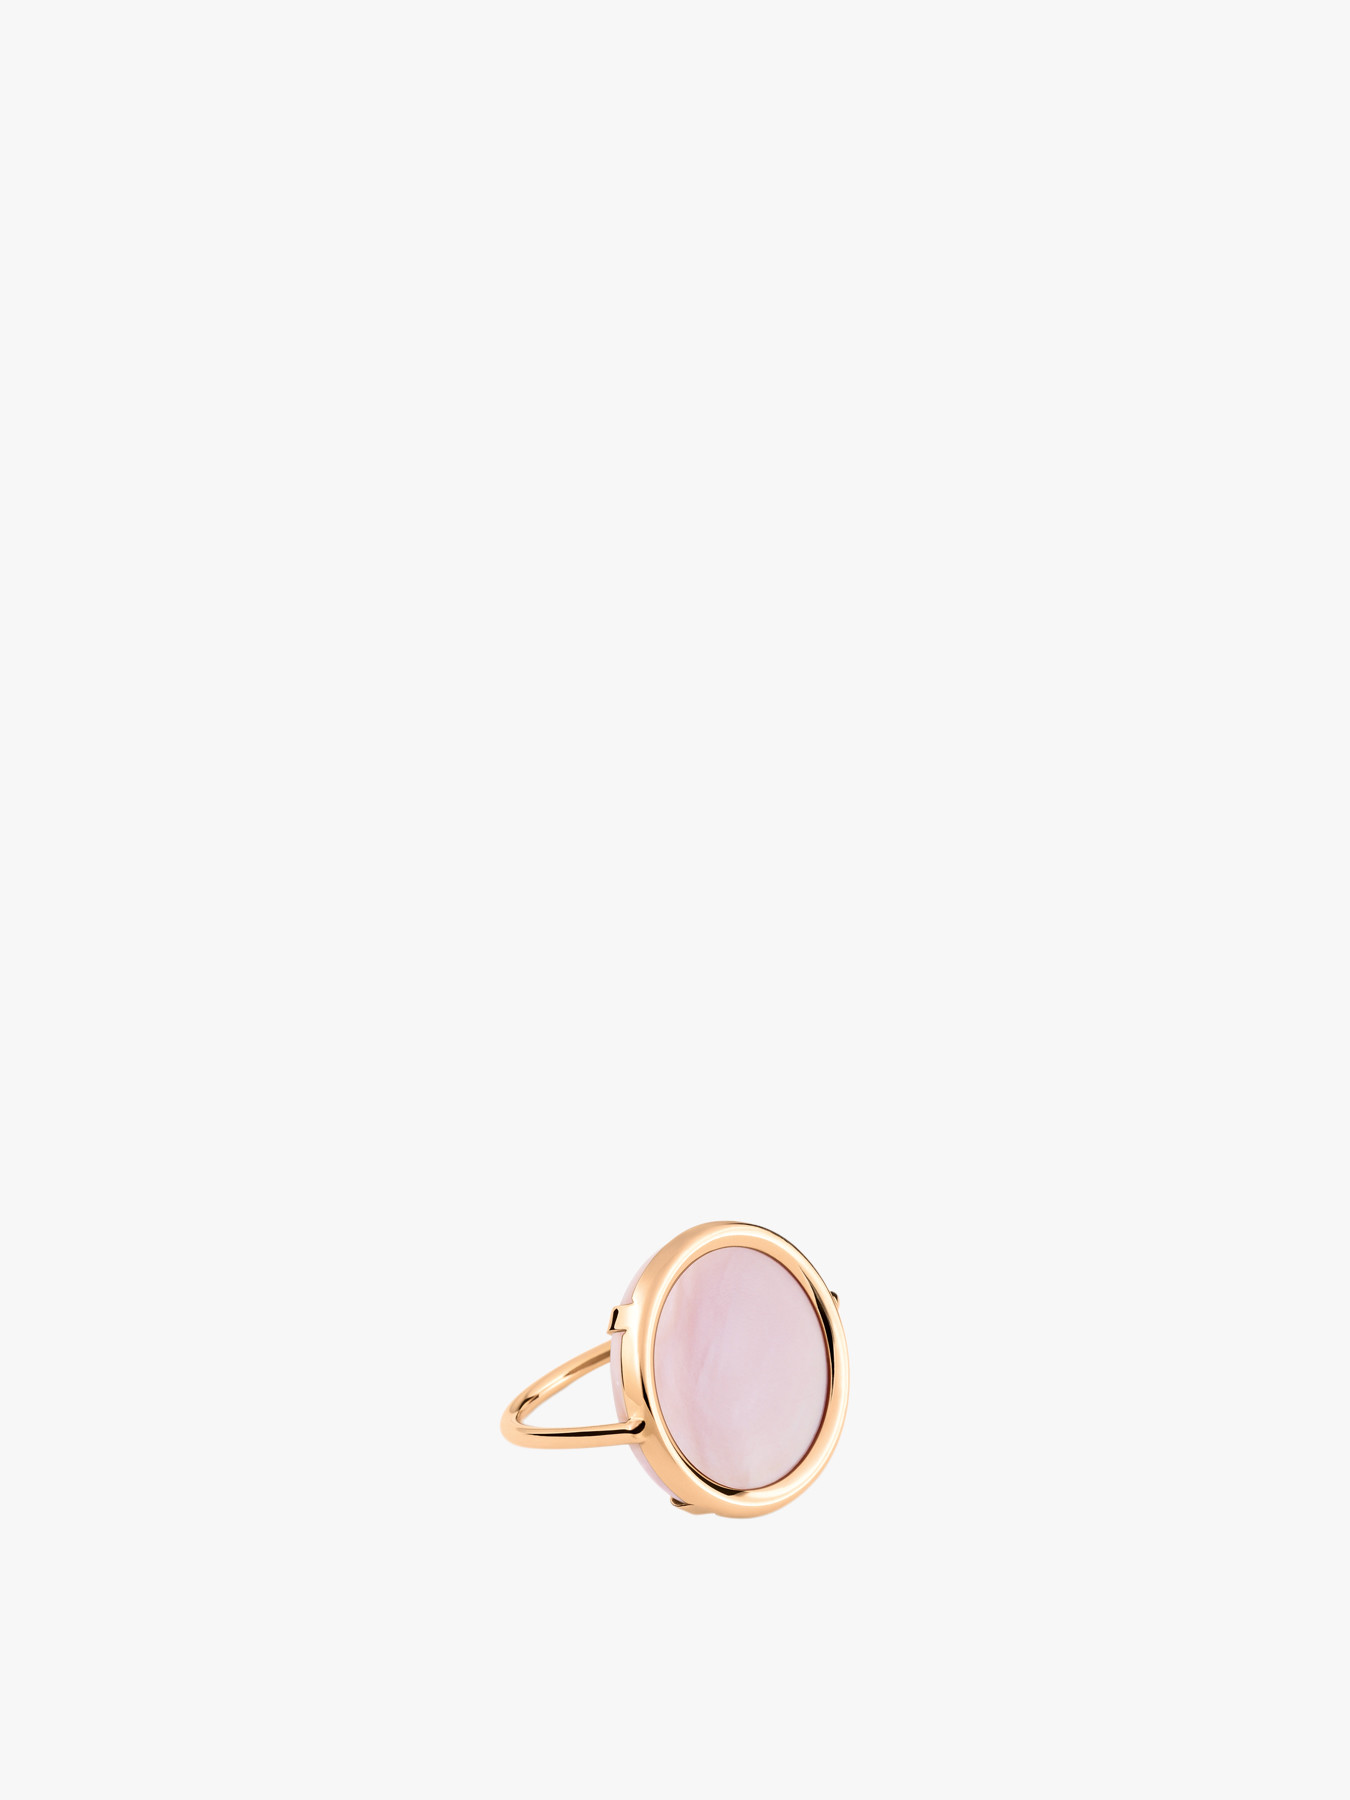 GINETTE NY EVER PINK MOP DISC RING GOLD/PINK